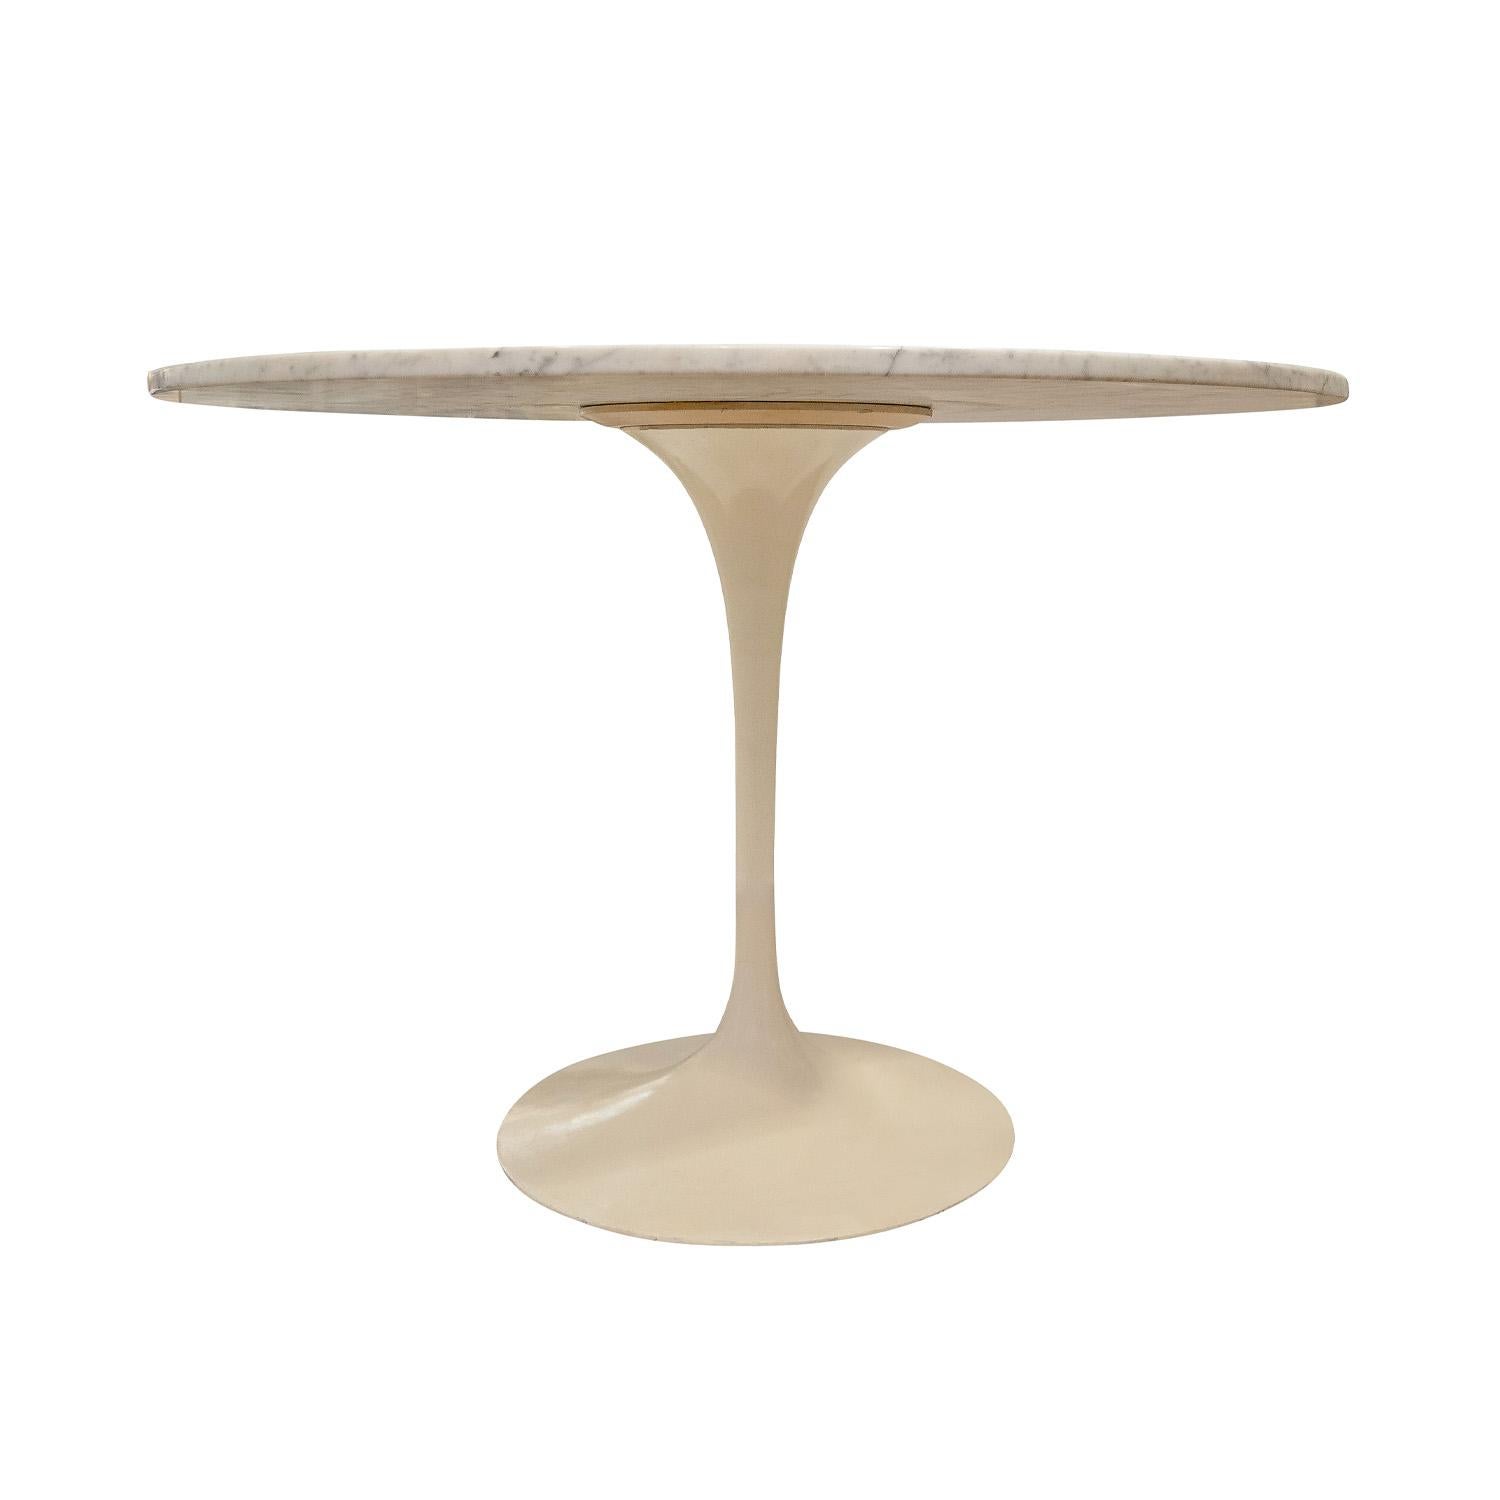 Modern Saarinen Tulip Style Dining/Game Table with Custom Polished Marble Top 1990s For Sale